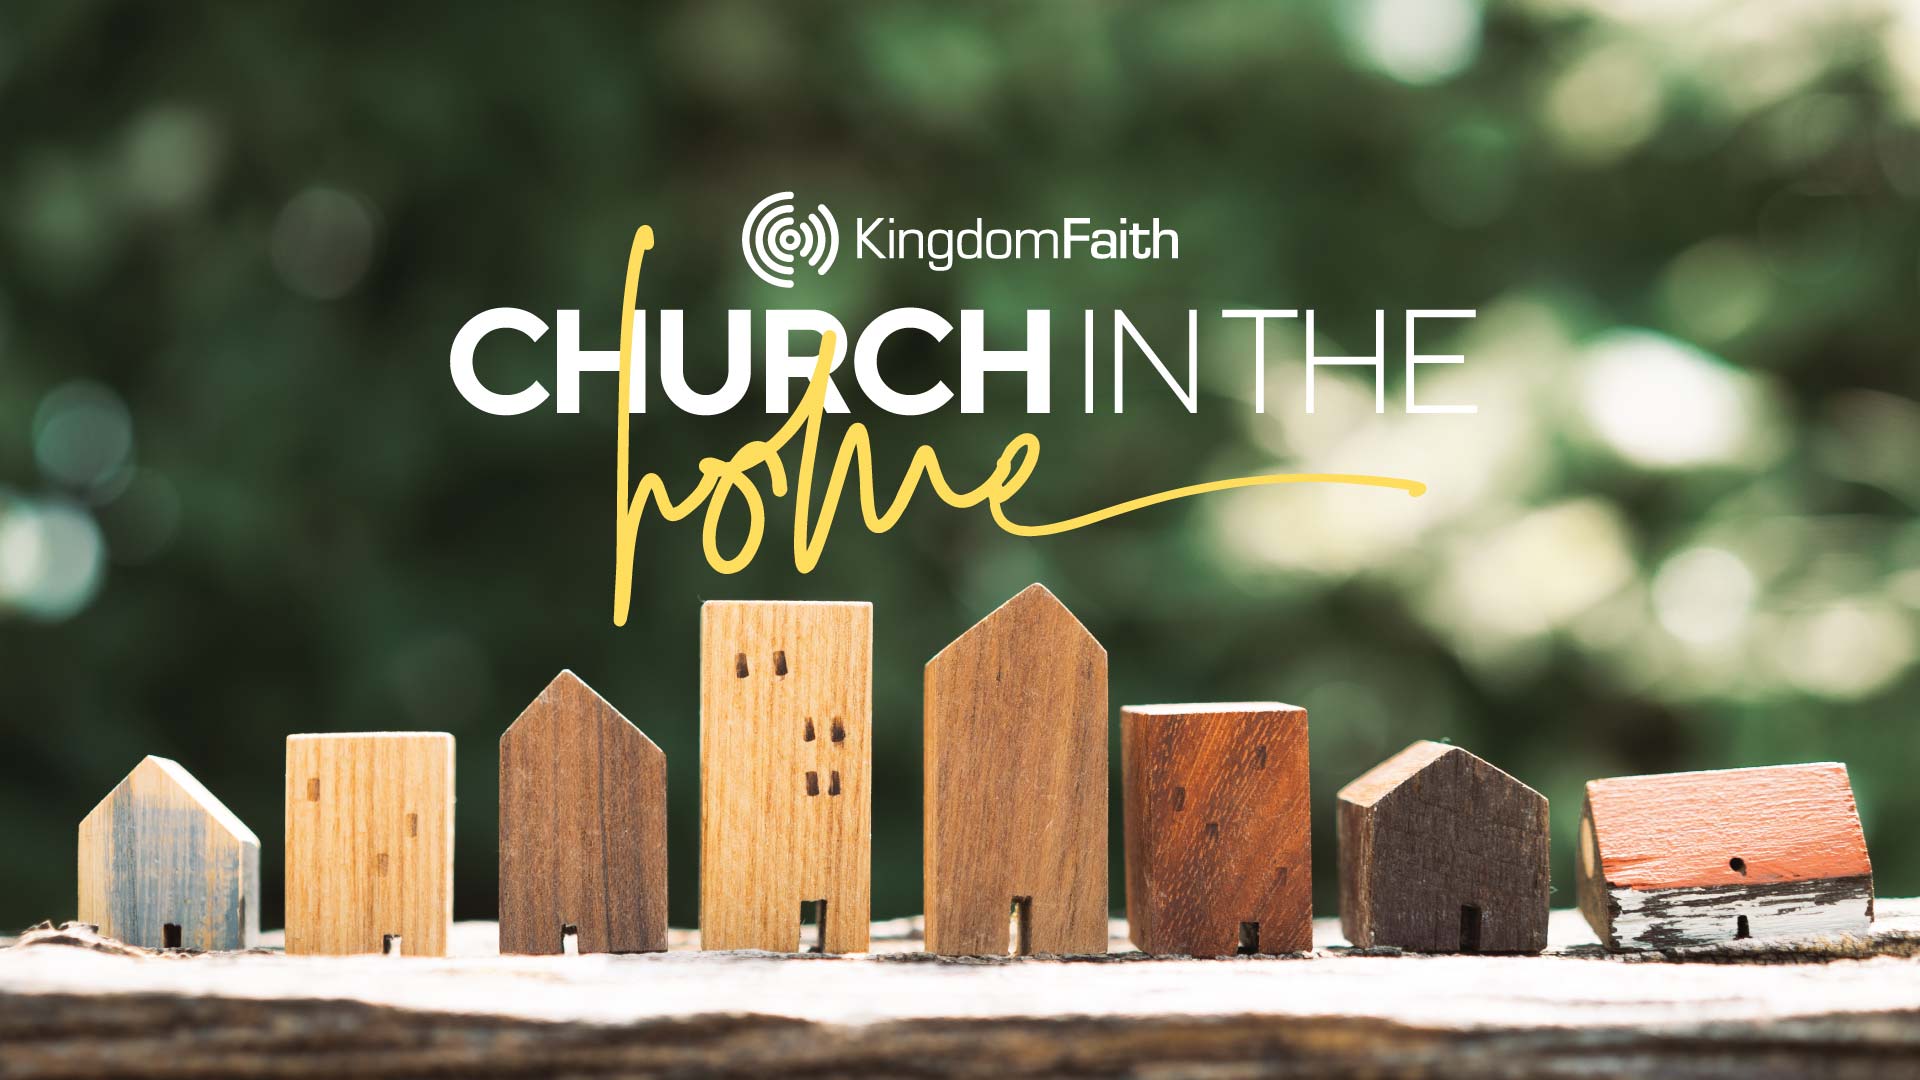 Church in the home - Sunday 14 Aug